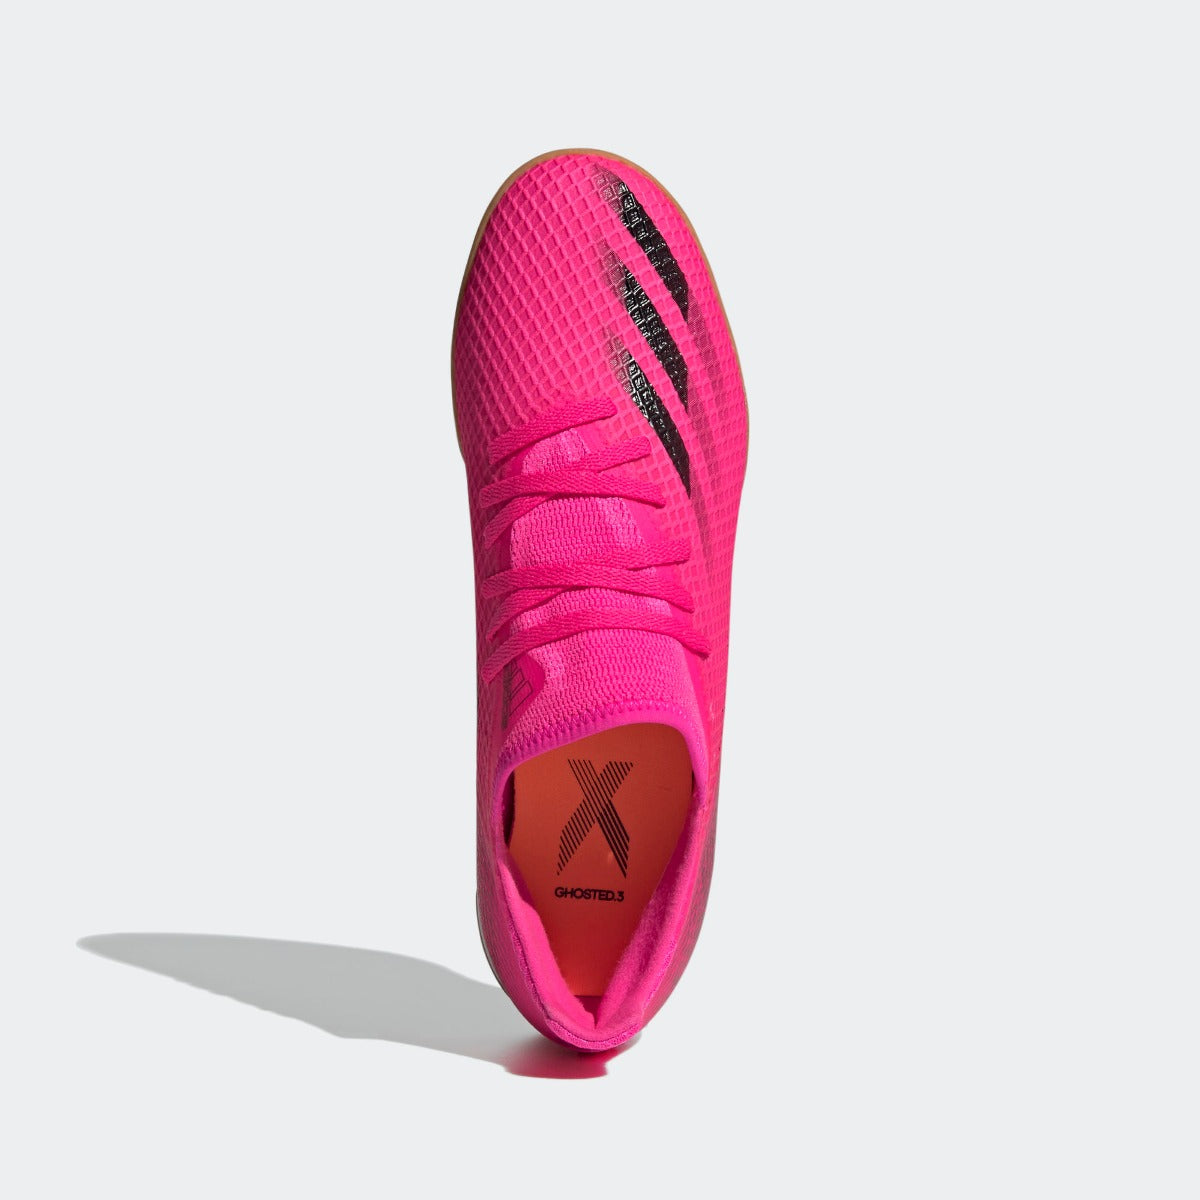 Adidas X Ghosted .3 IN - Pink-Black (Top)